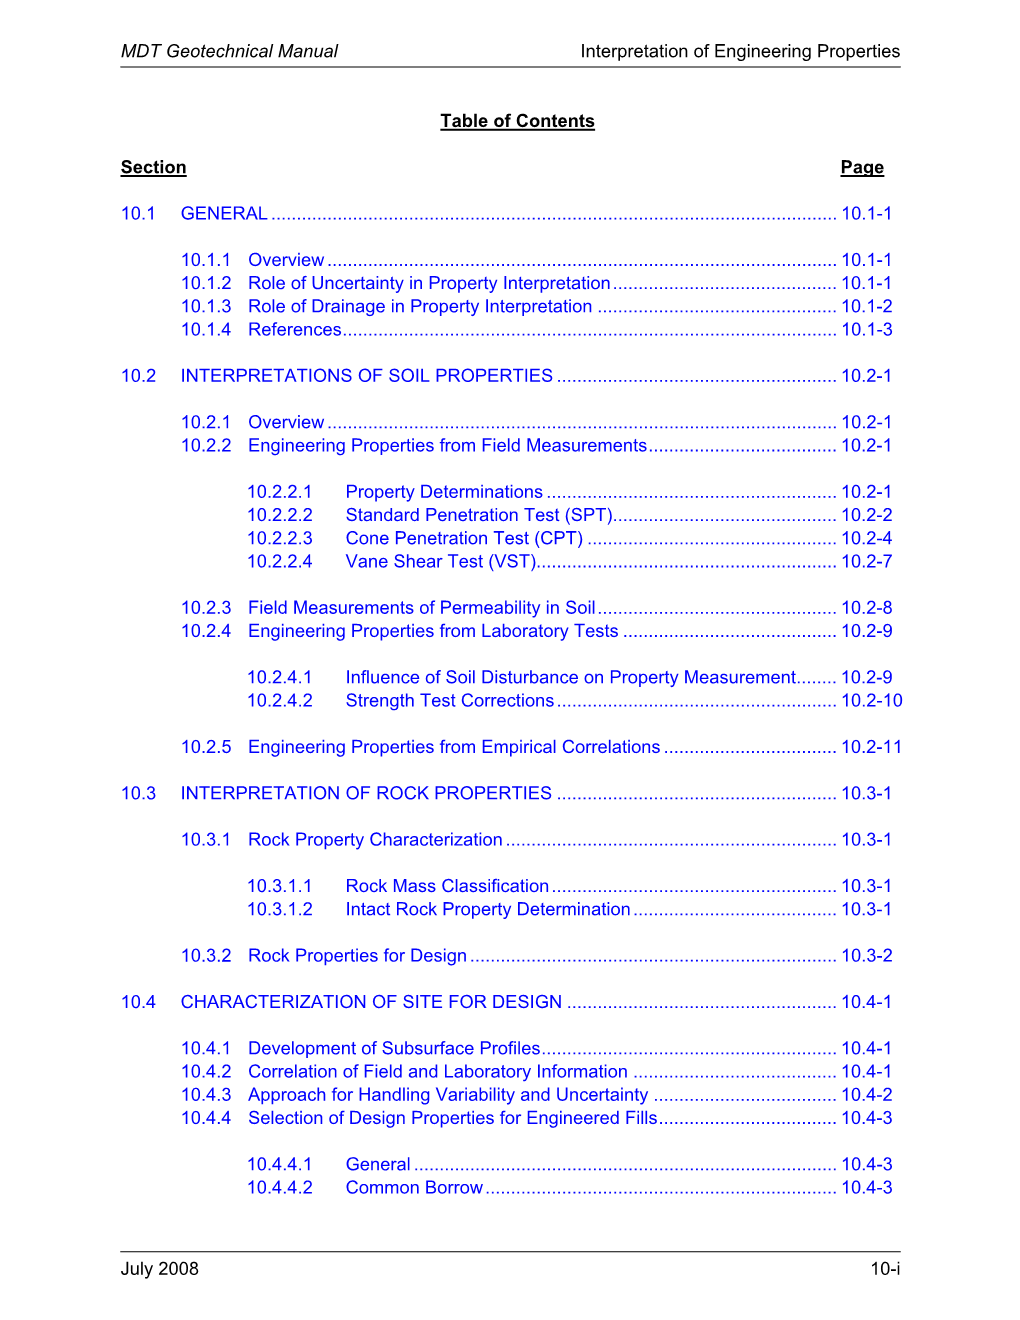 MDT Geotechnical Manual Interpretation of Engineering Properties July 2008 10-I Table of Contents Section Page 10.1 GENERAL